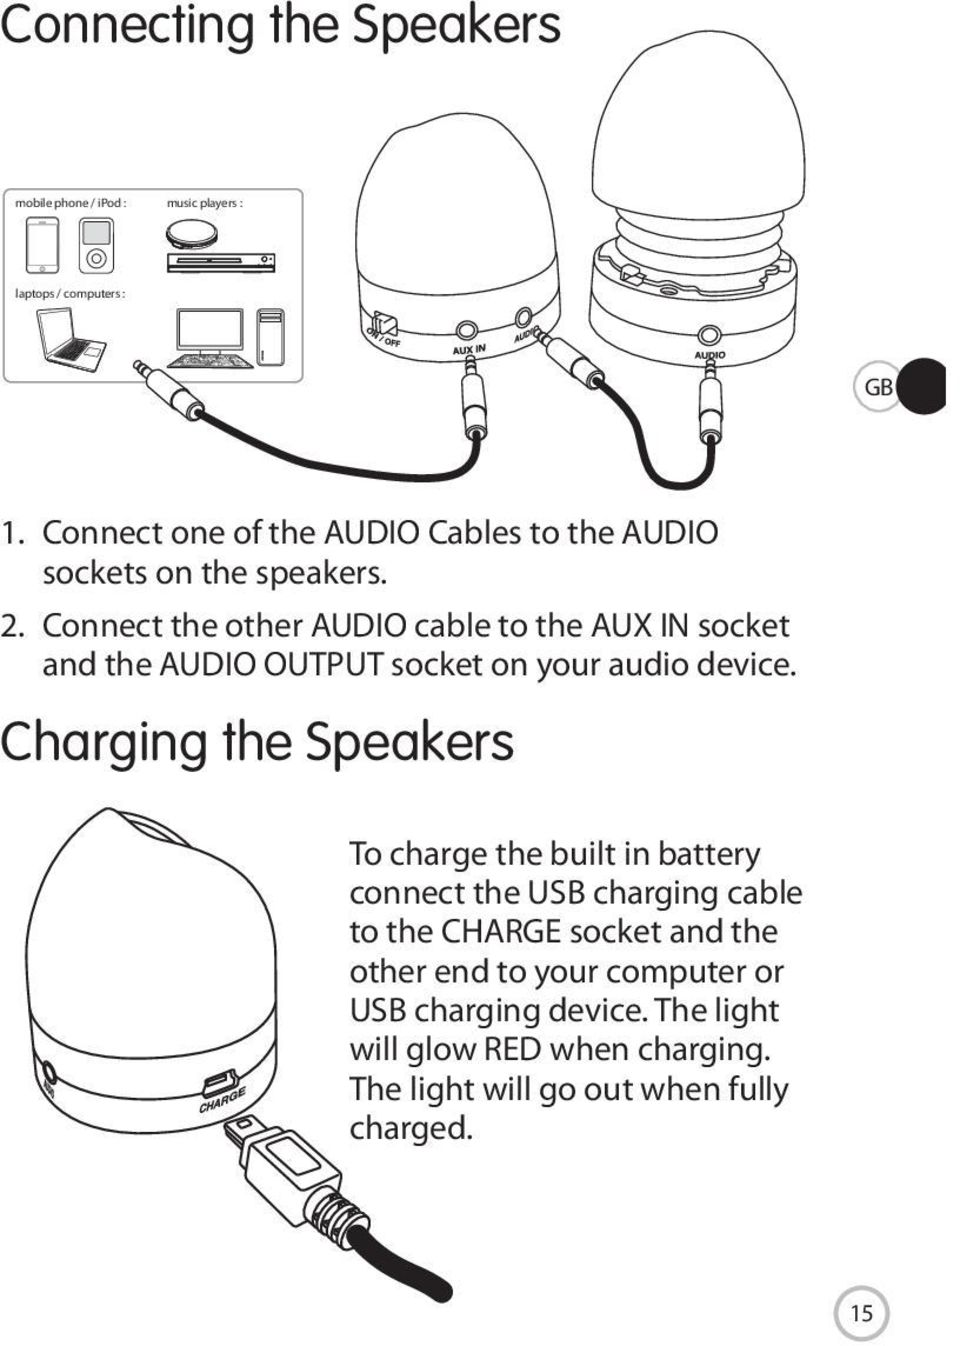 Connect the other AUDIO cable to the AUX IN socket and the AUDIO OUTPUT socket on your audio device.